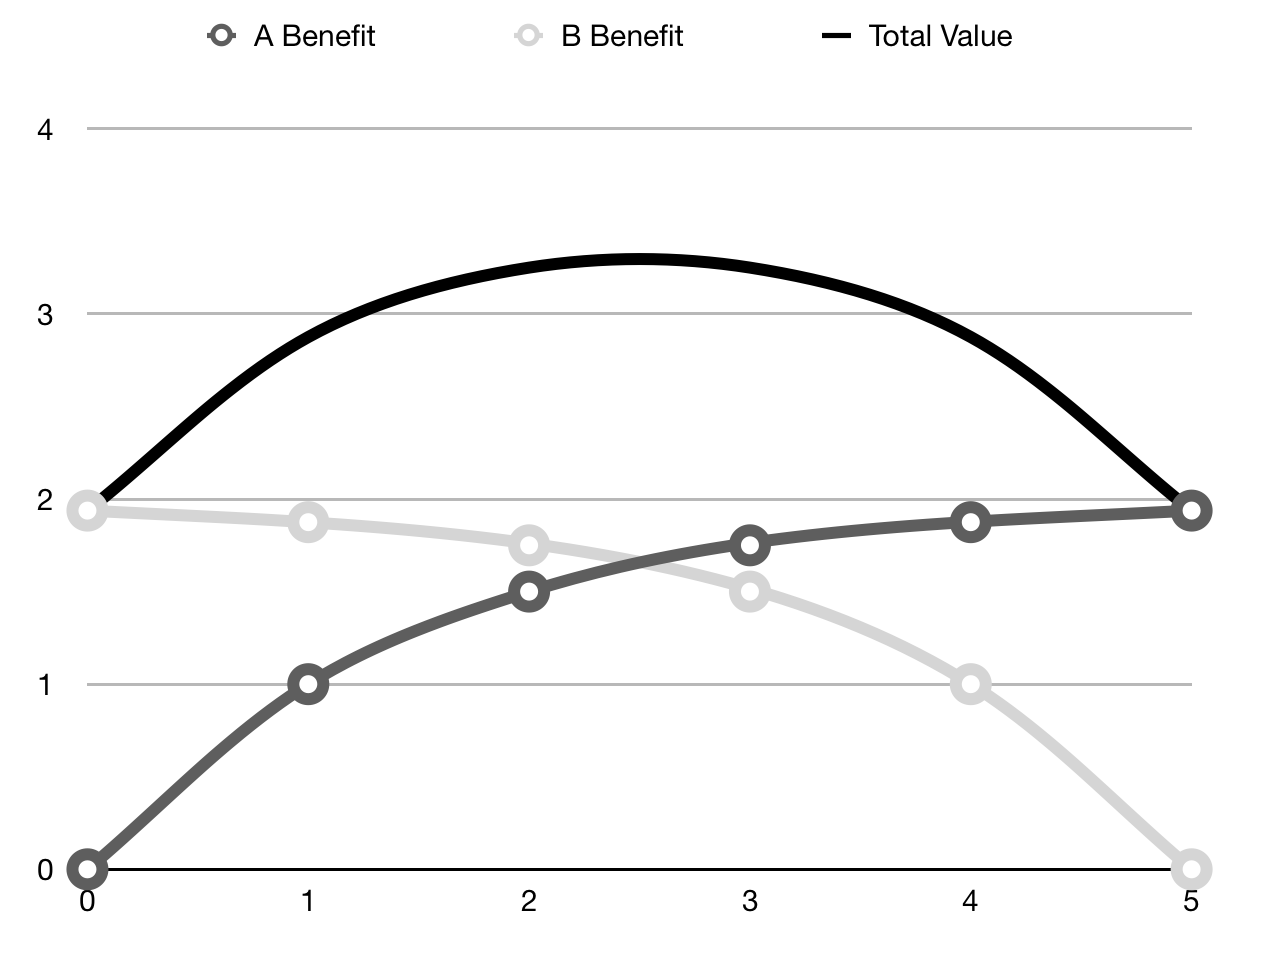 Sharing Resources.  5 units are available, and the X axis shows A&#39;s consumption of the resource.  B gets whatever remains.  Total benefit is maximised somewhere in the middle